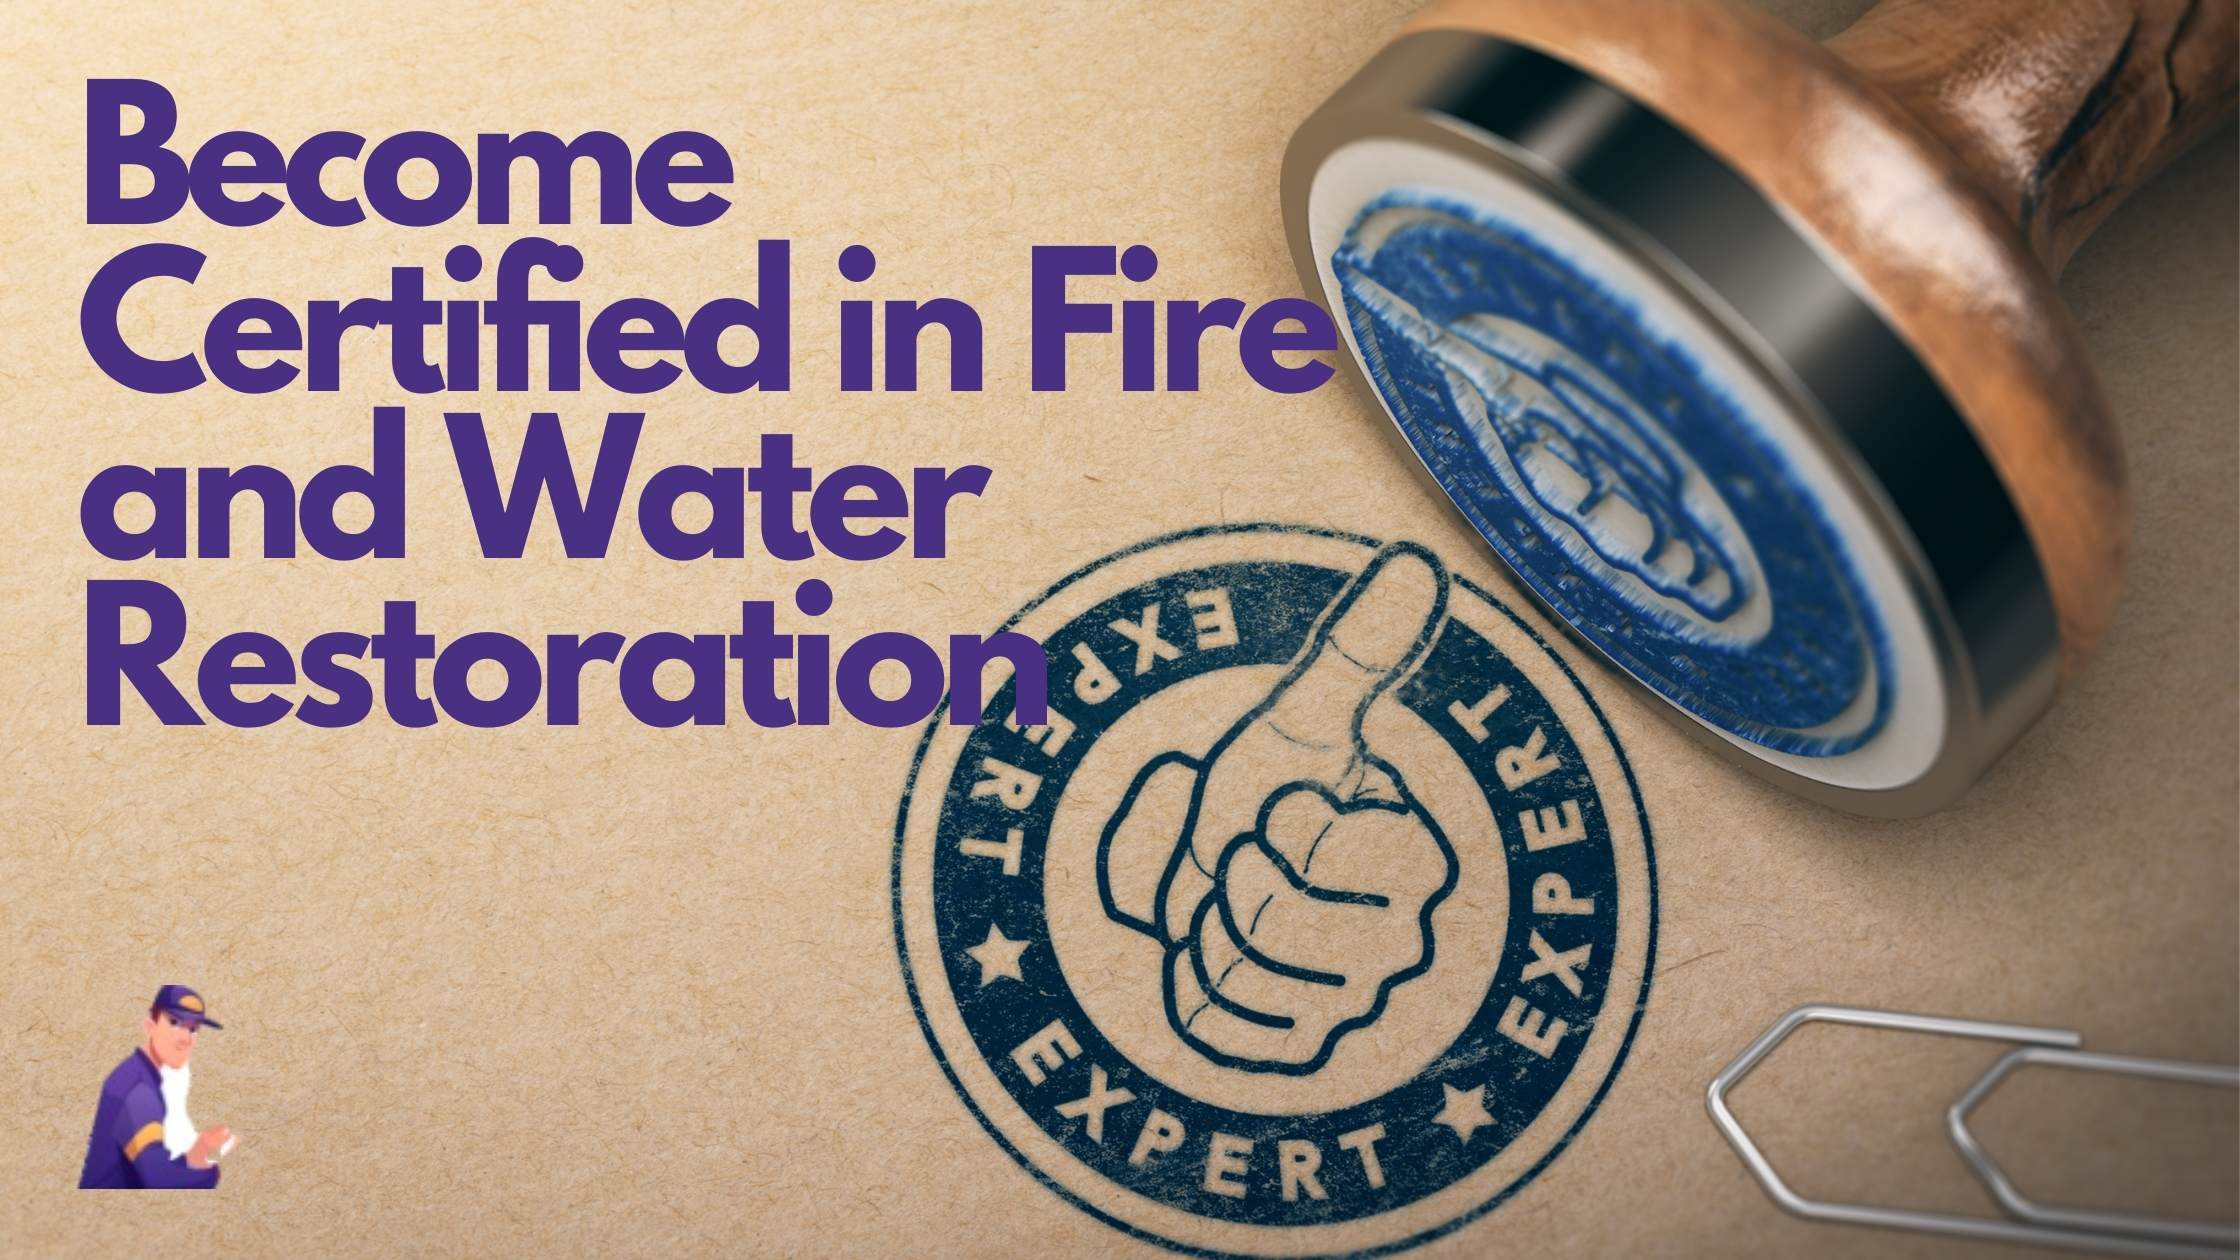 Become Certified in Fire and Water Restoration